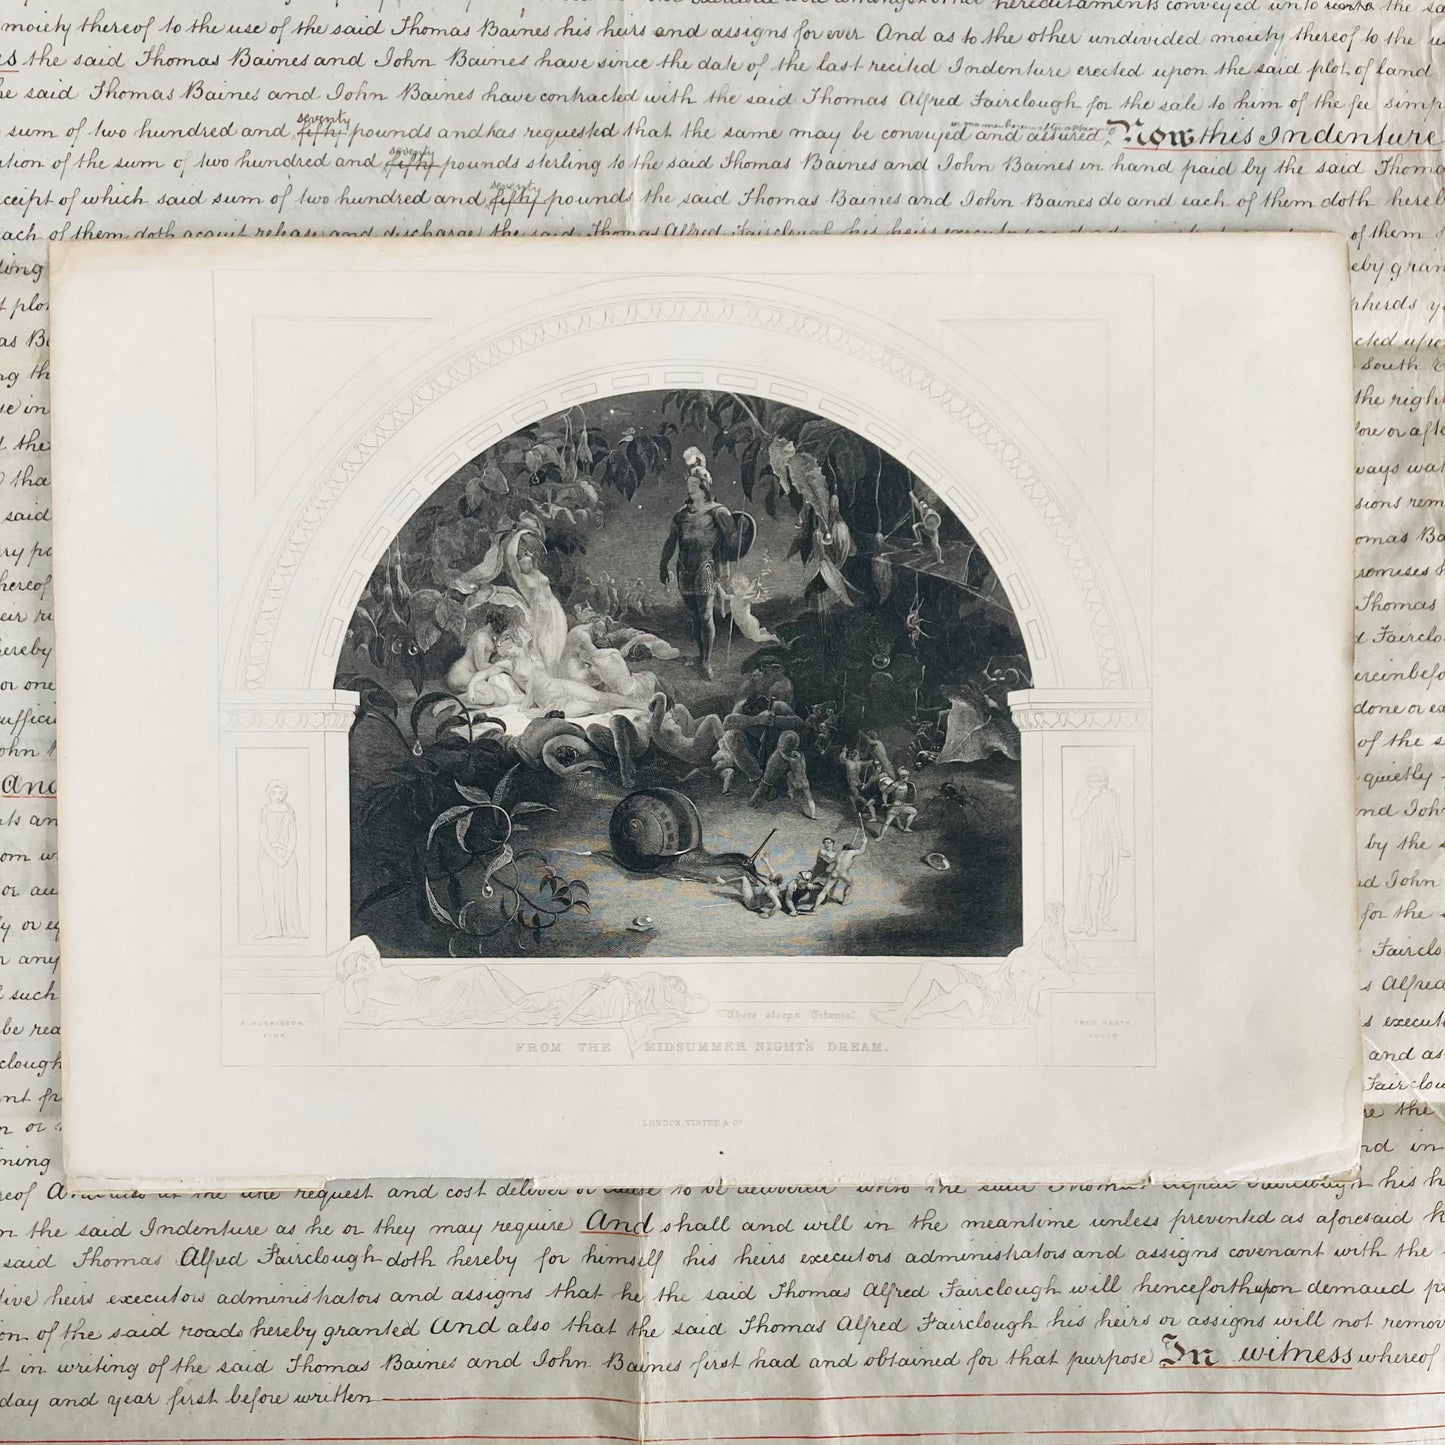 Antique Etching Plate Engraving of a Scene in Shakespeare’s Works